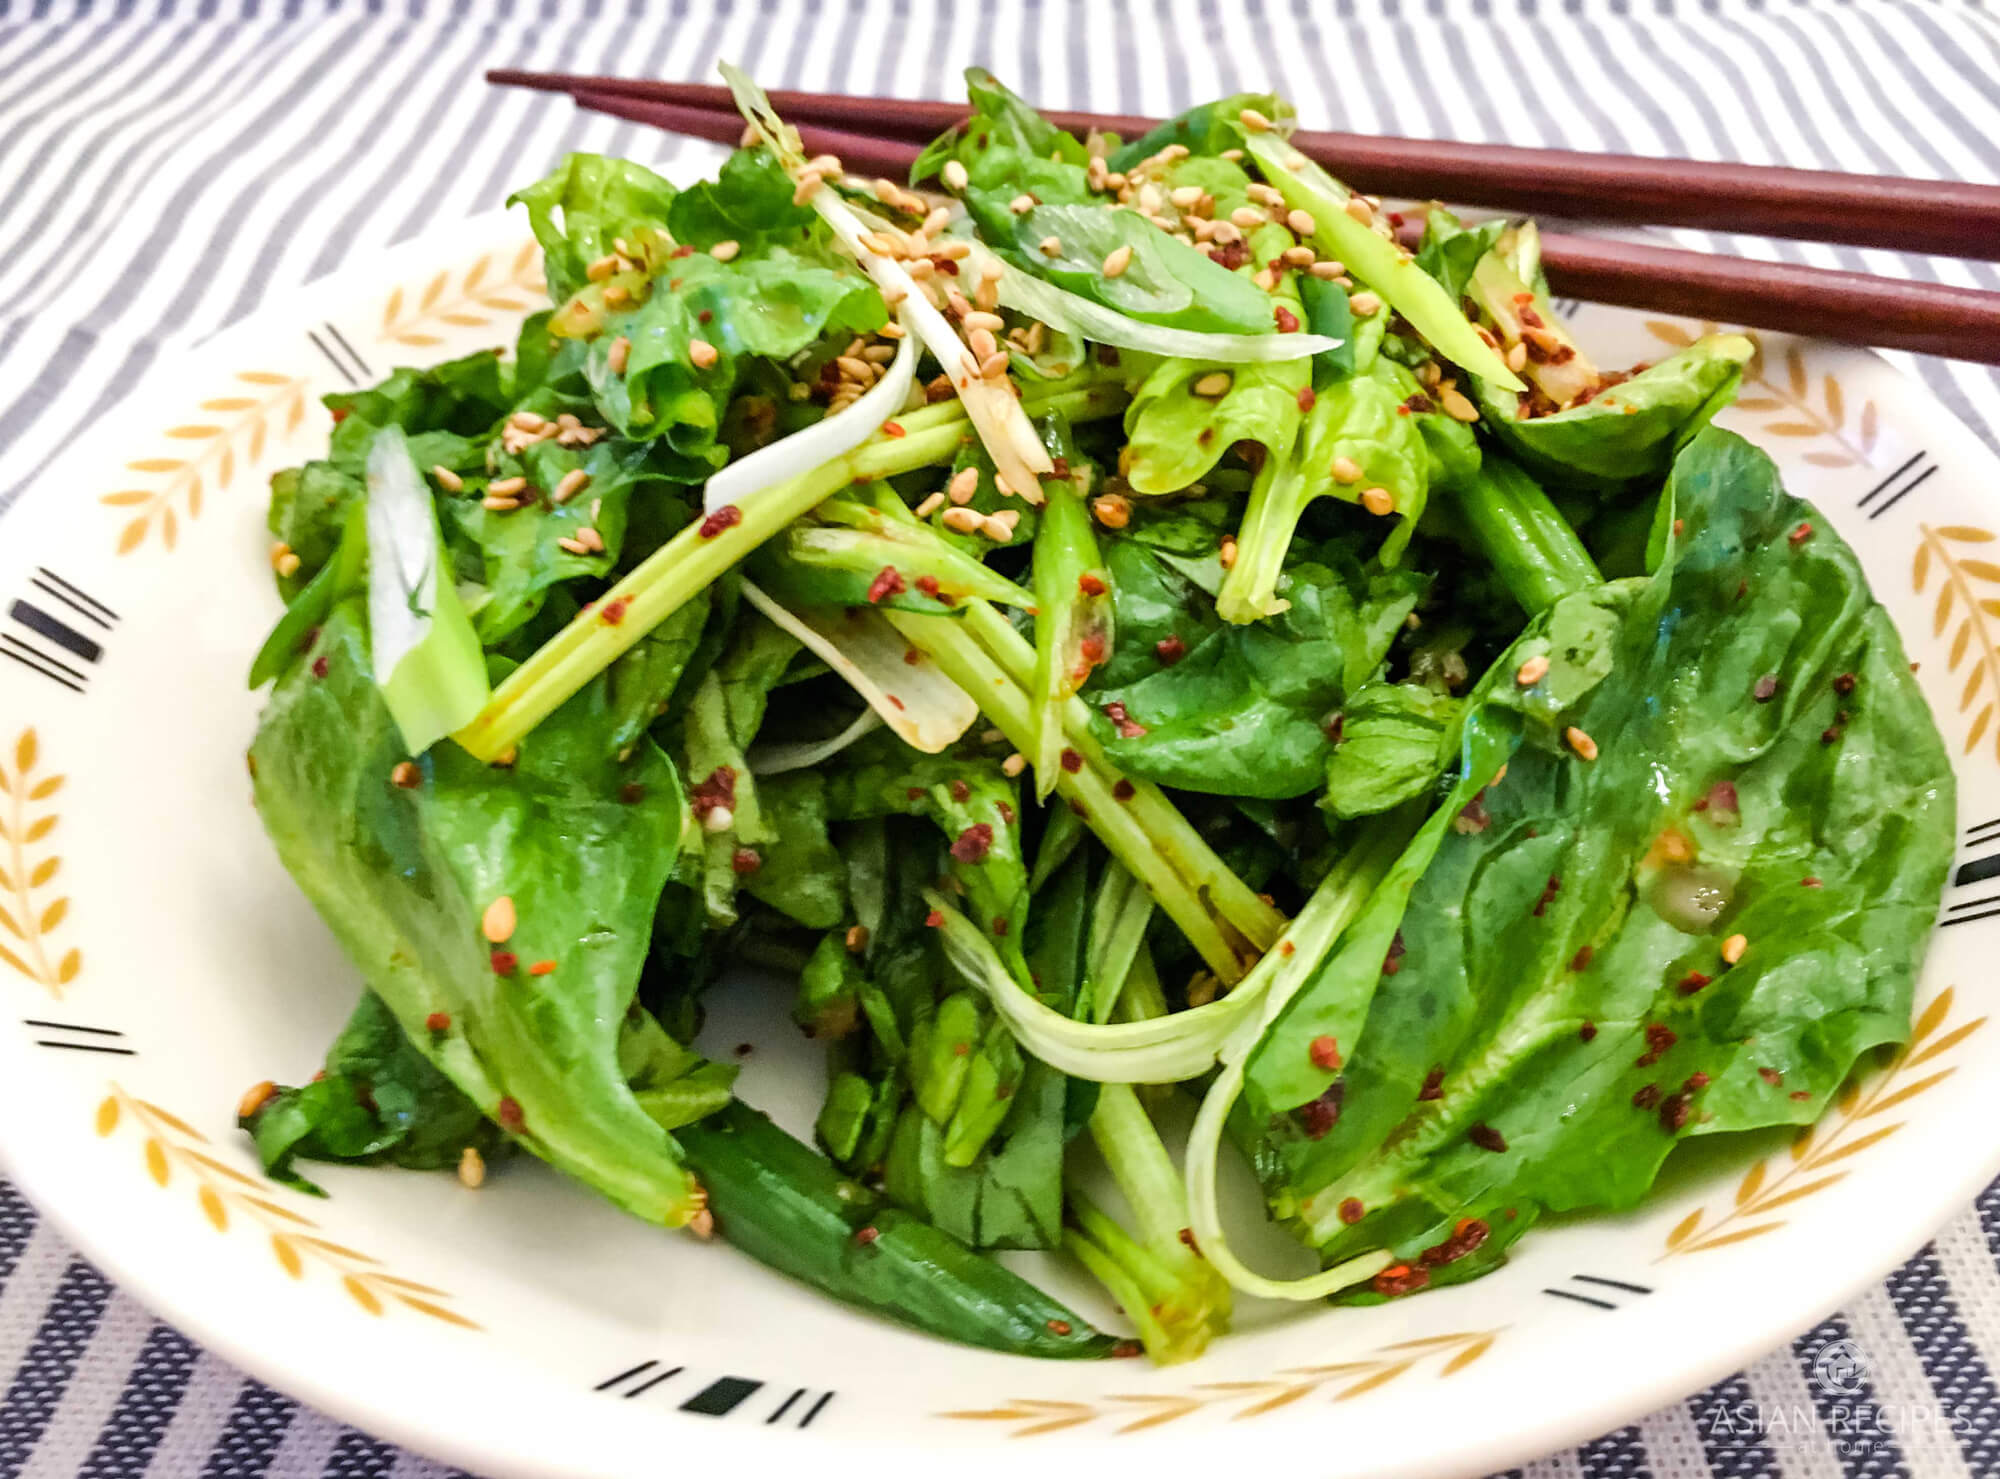 This fresh Korean spinach salad is super simple, healthy and quick to make.